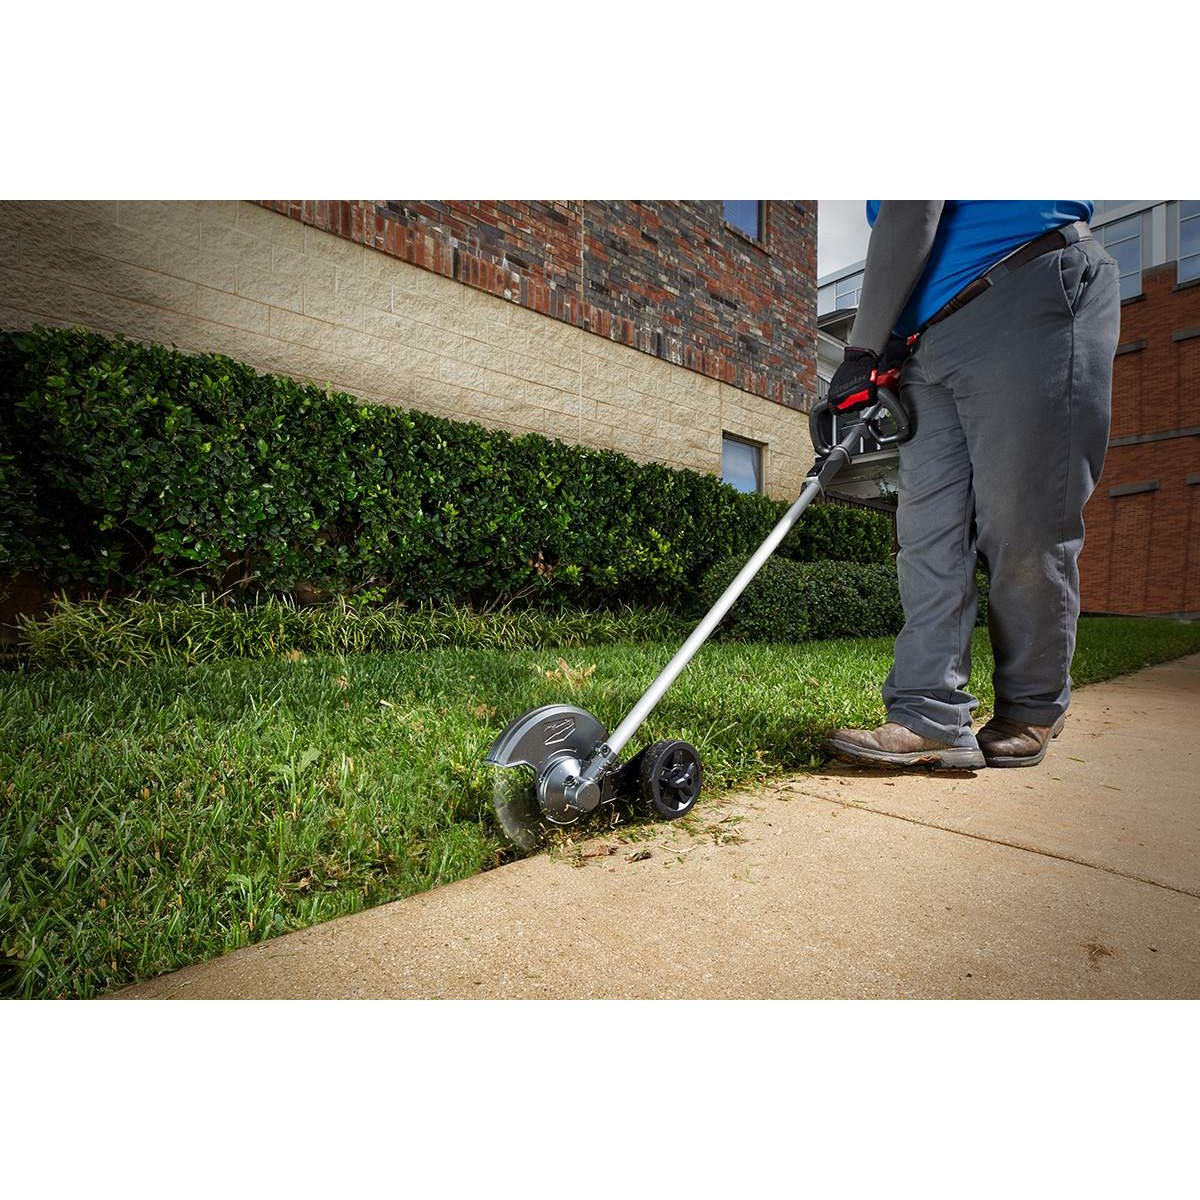 milwaukee articulating hedge trimmer